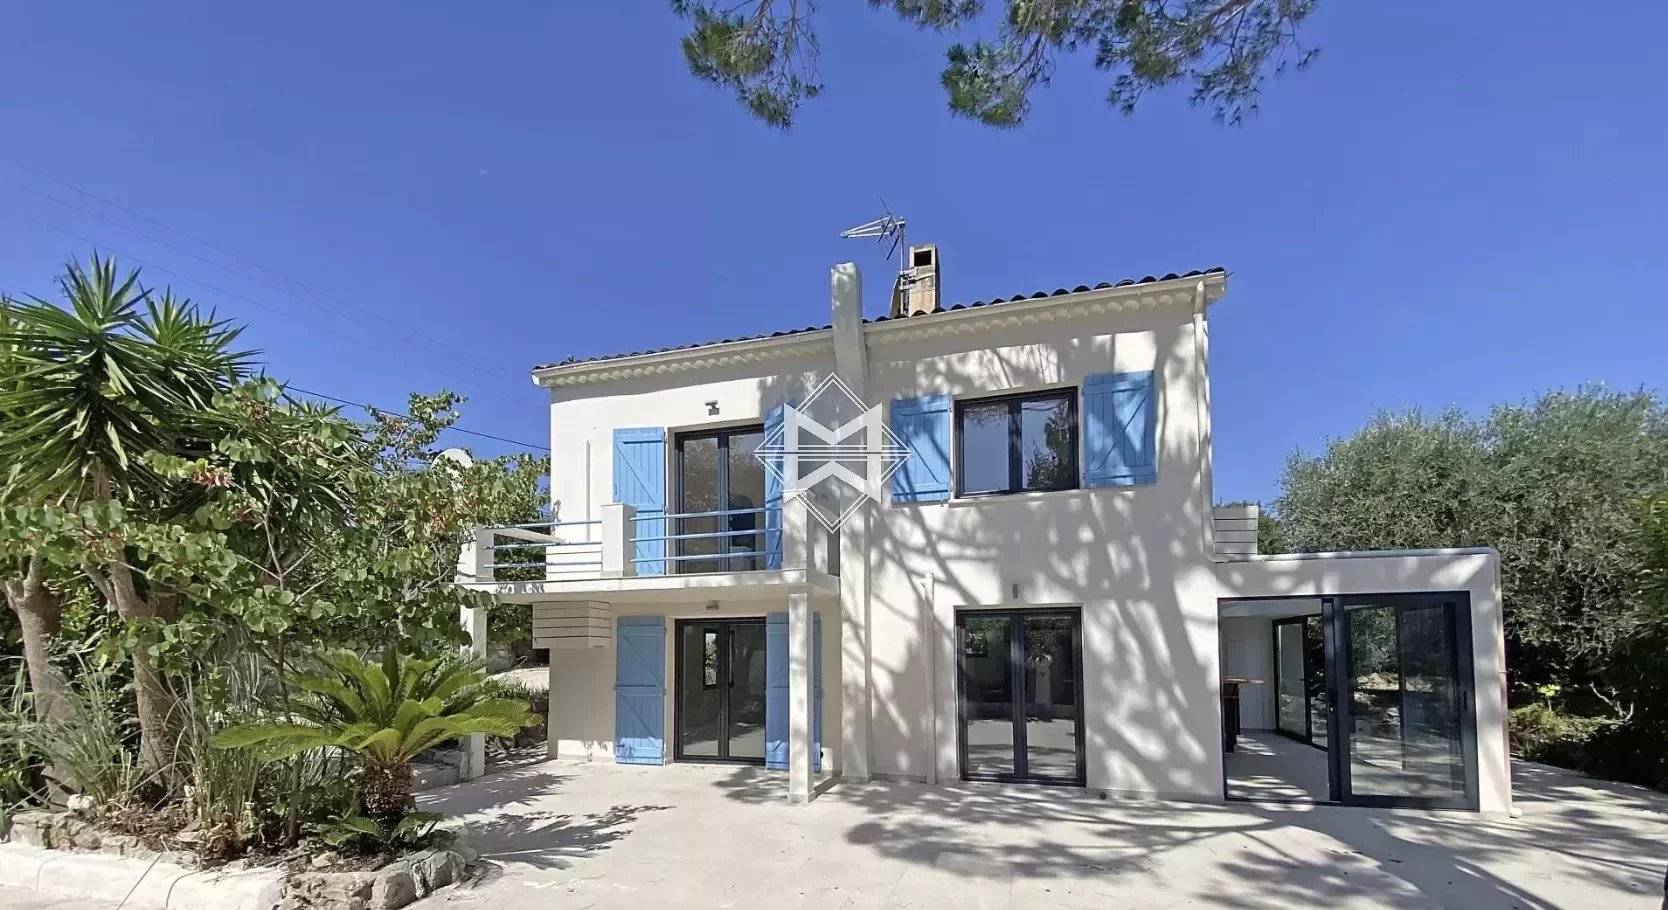 Provencal style property in total peace and quiet